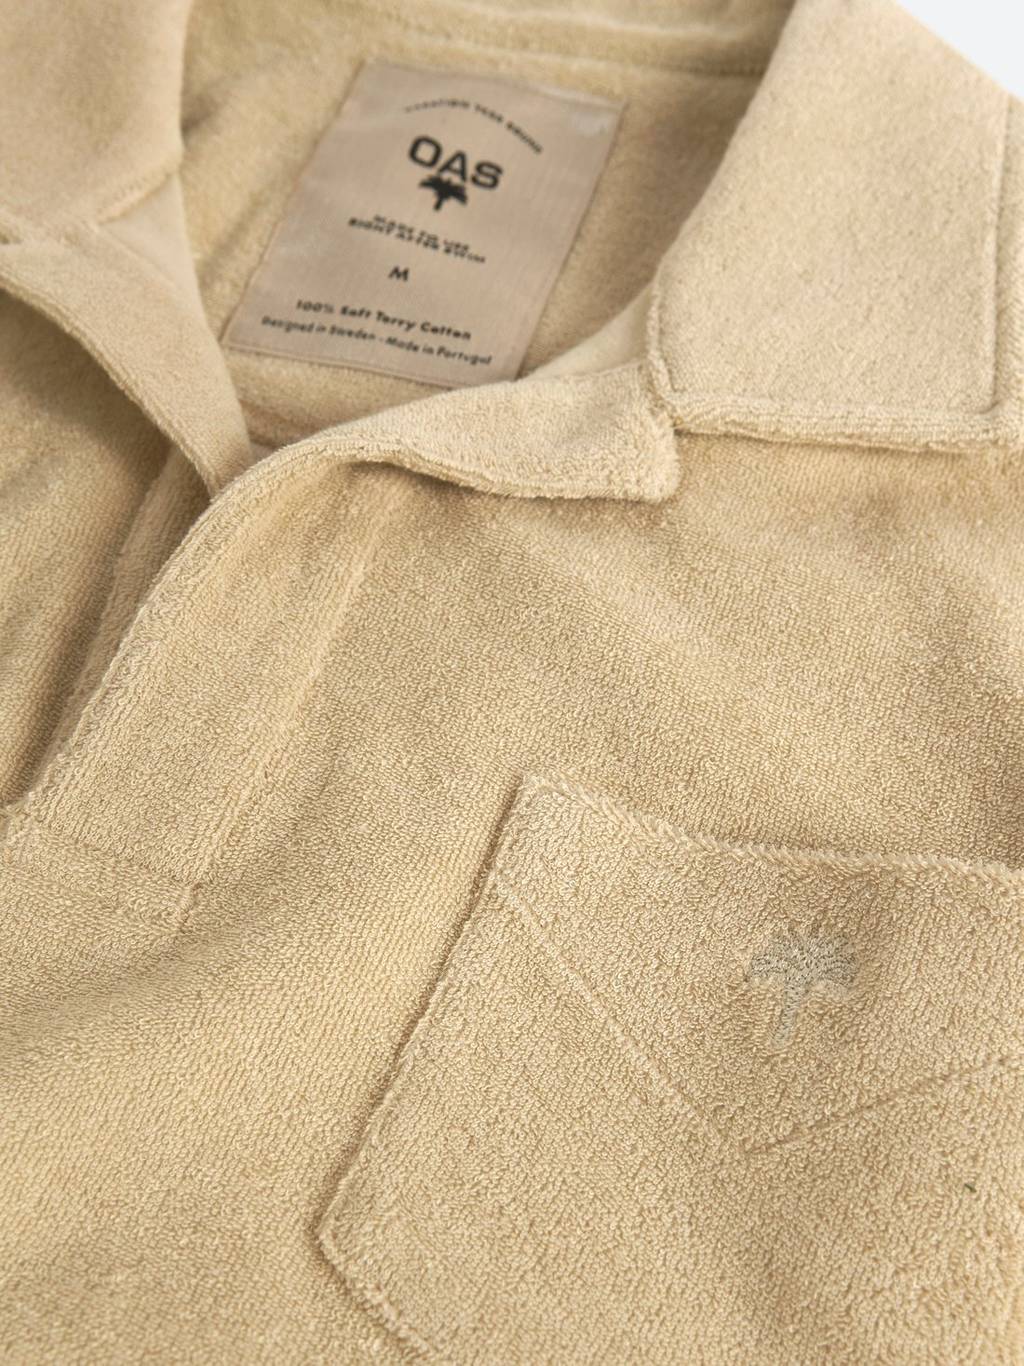 Polo Terry Shirt - Beige